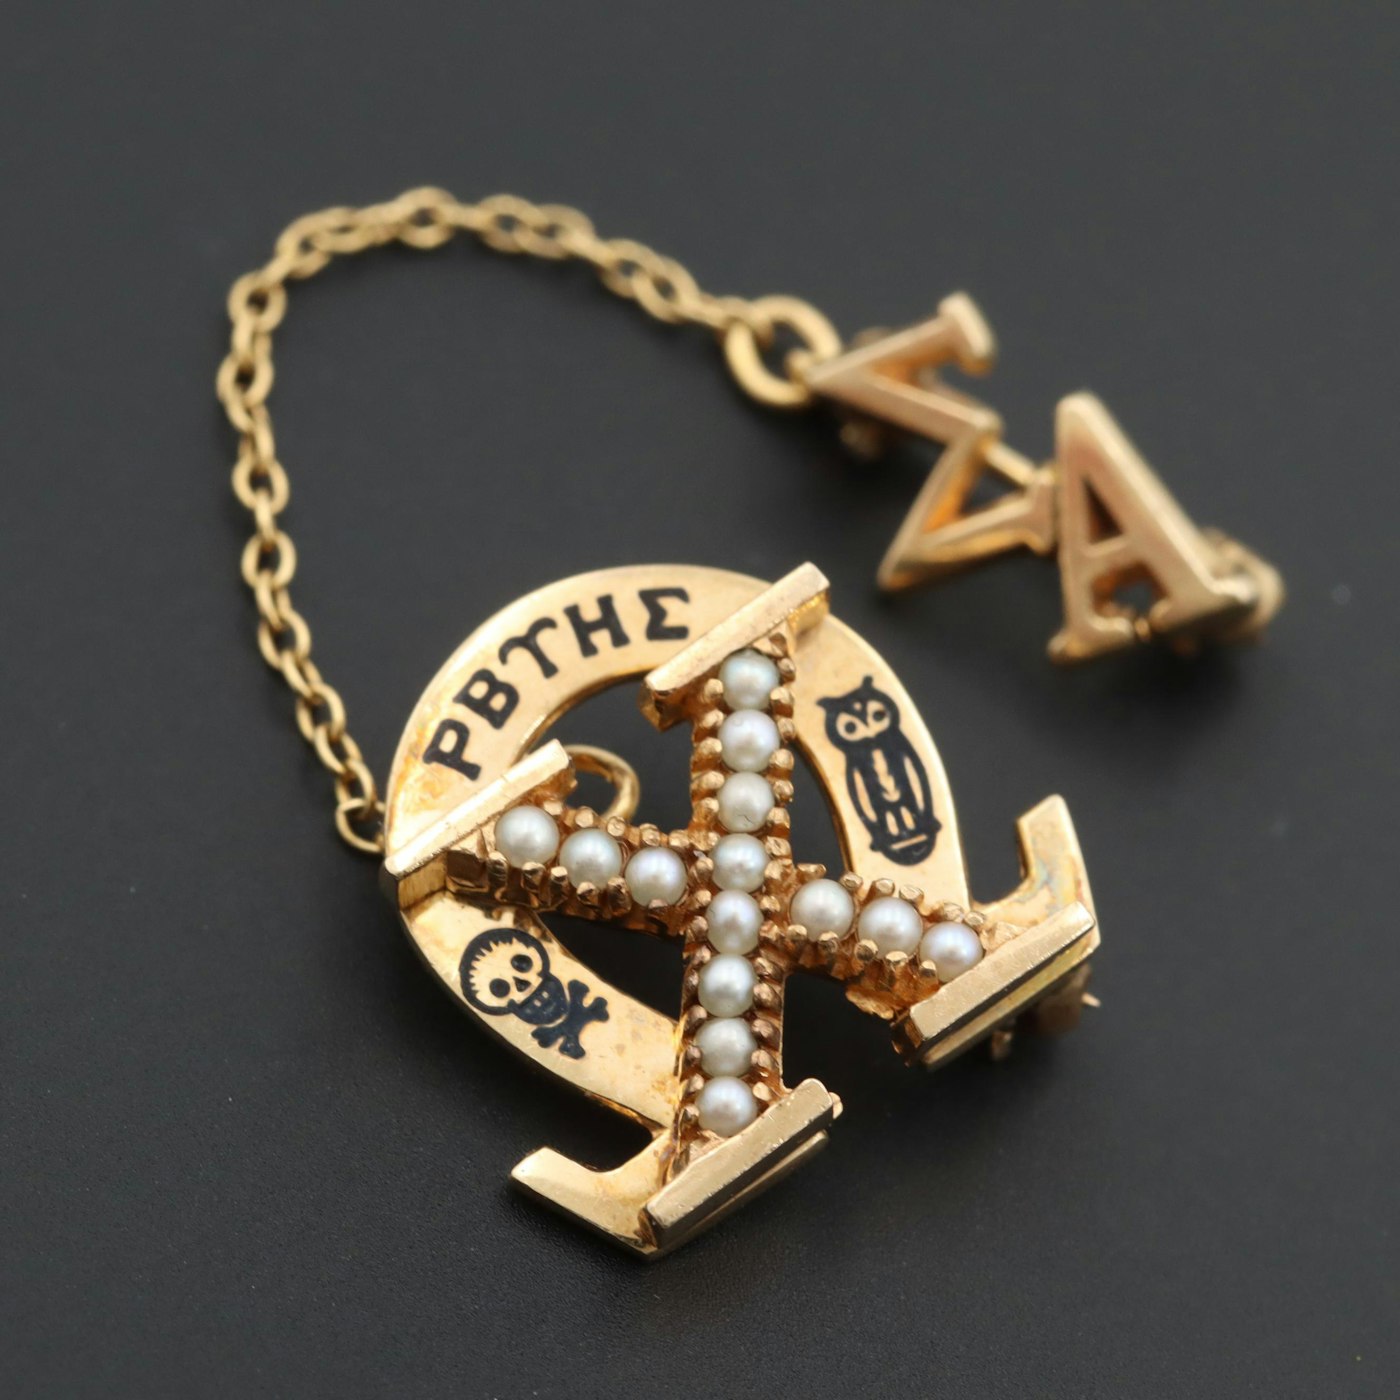 Vintage 10K Yellow Gold Chi Omega Sorority Badge with Cultured Pearls ...